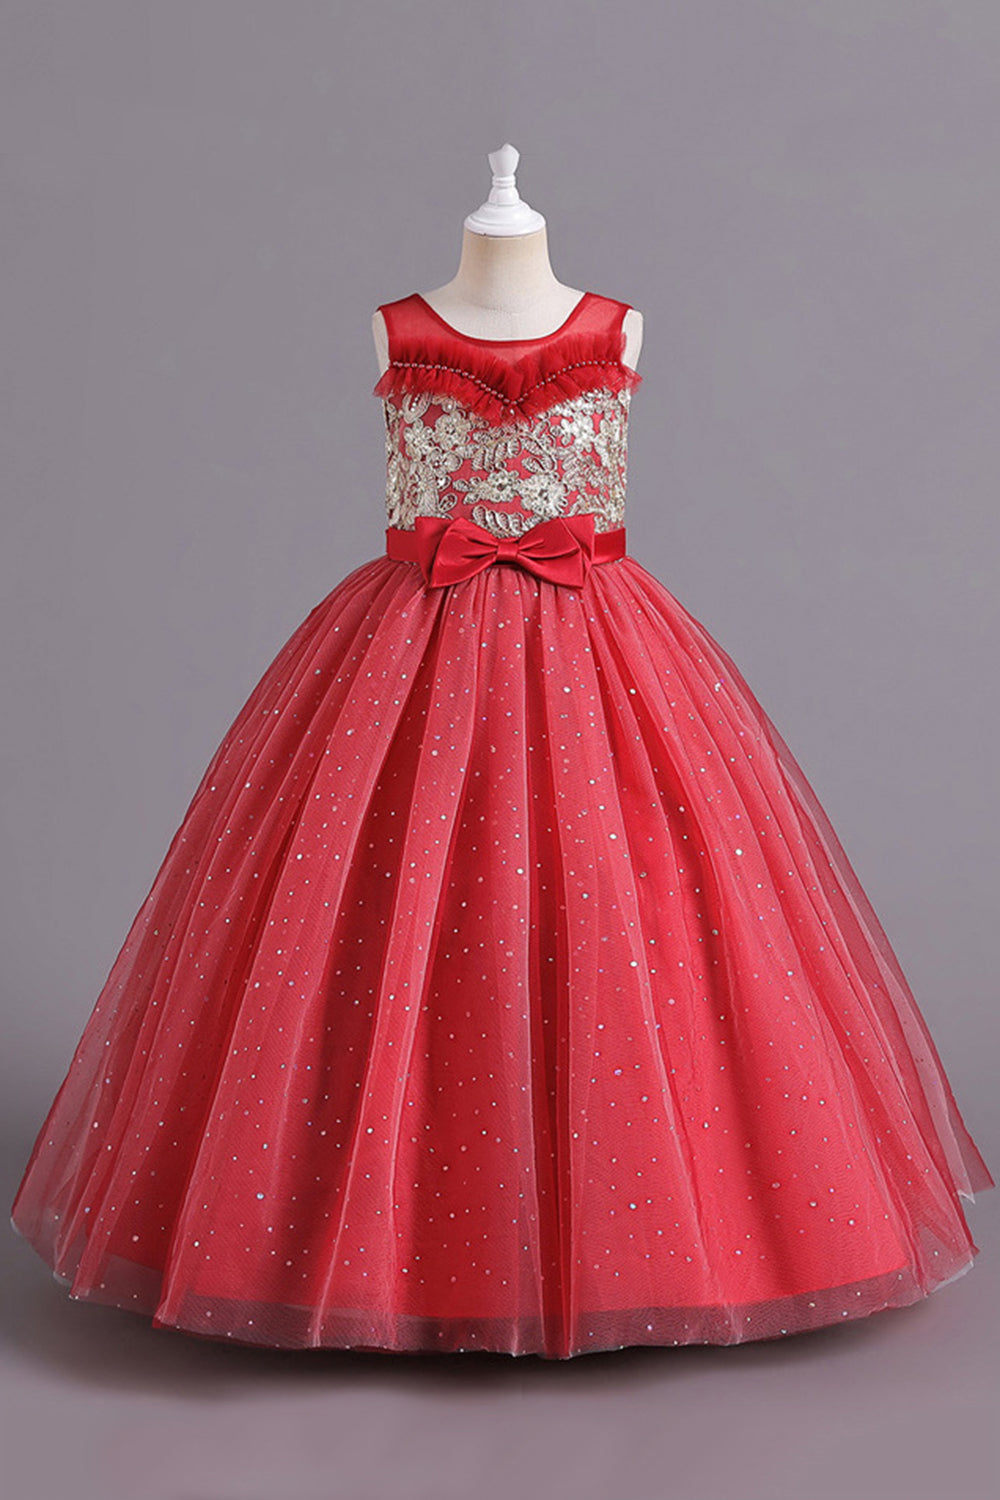 Red A Line Beaded Girls' Dress With Bow